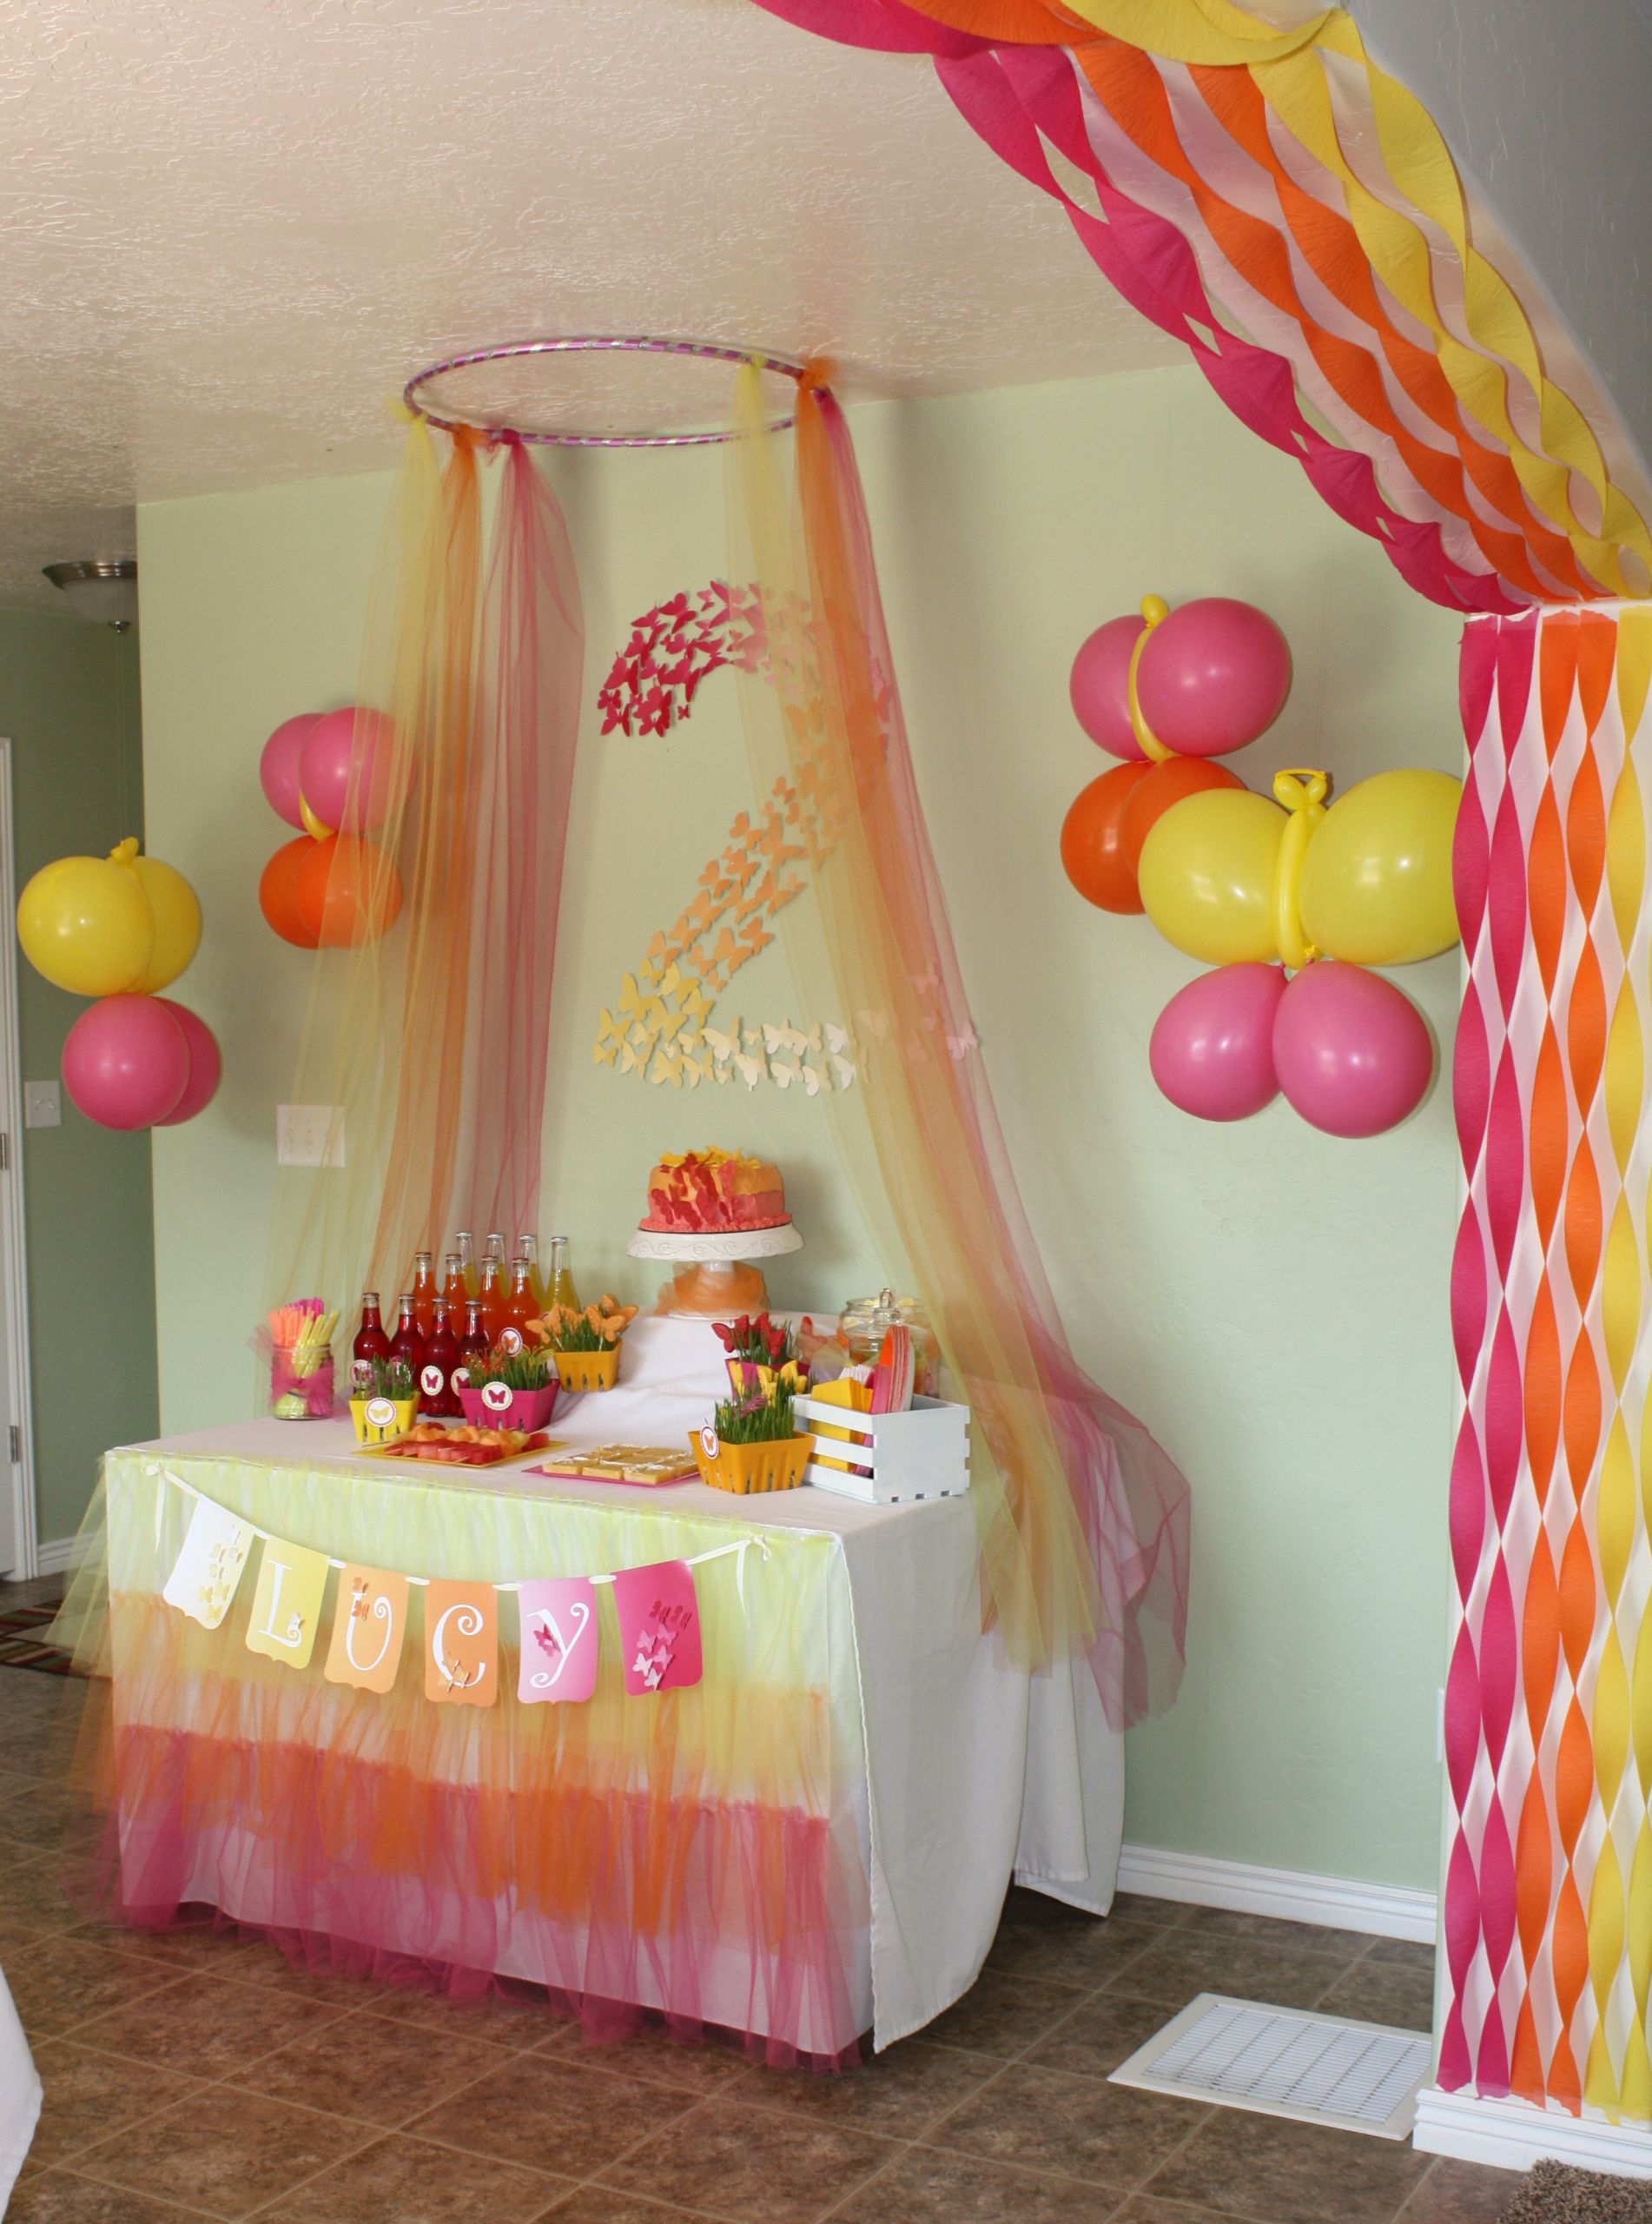 Birthday Party Decorating Ideas
 Butterfly Themed Birthday Party Decorations events to